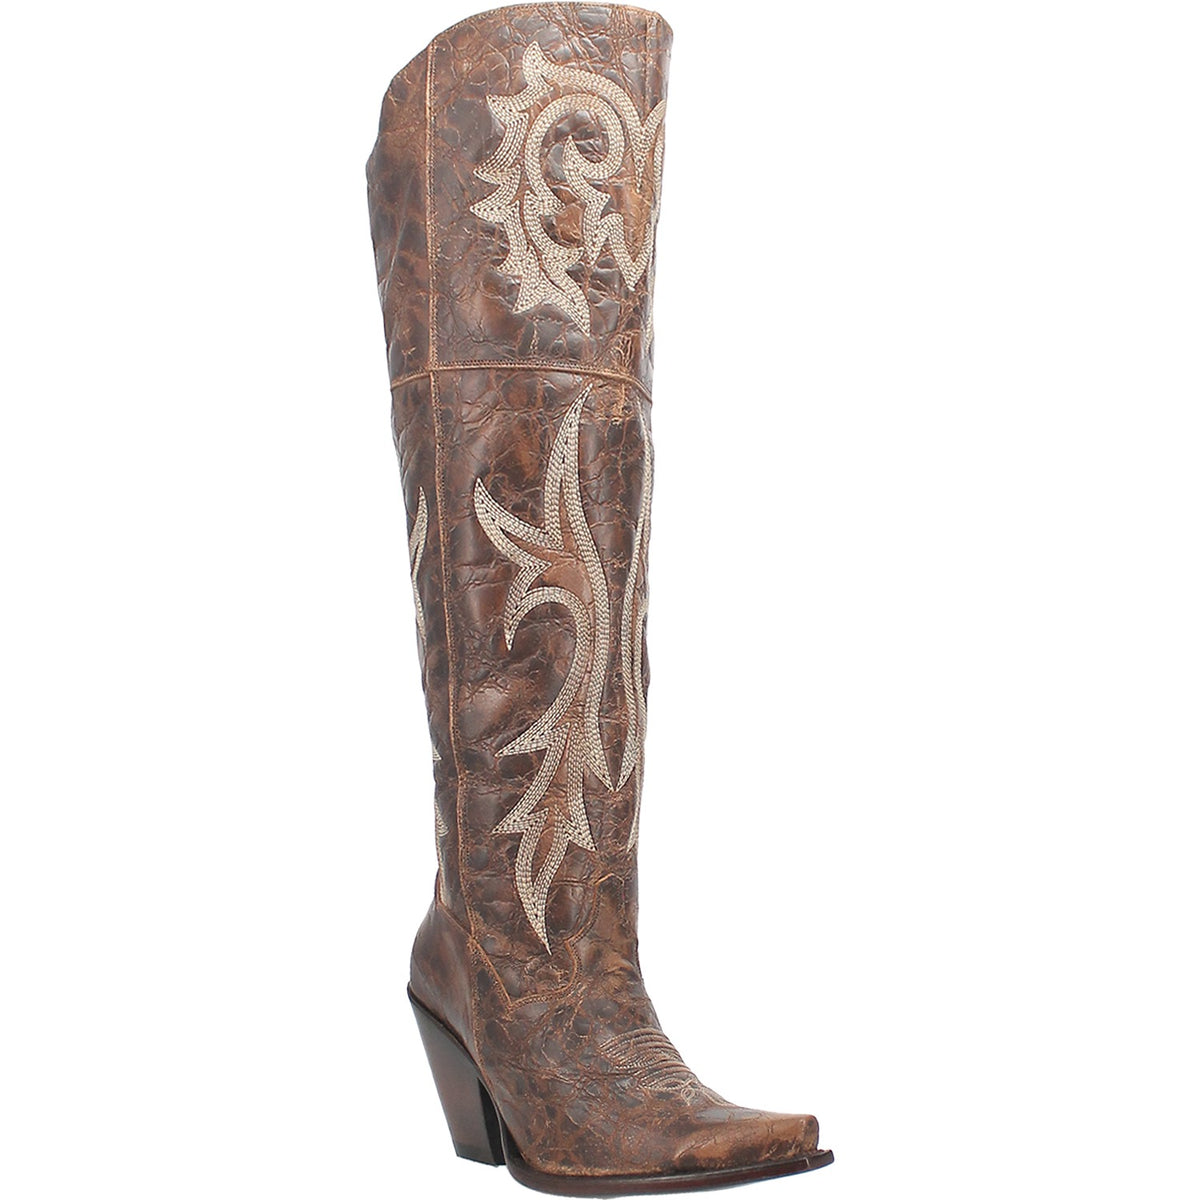 JILTED LEATHER BOOT Cover